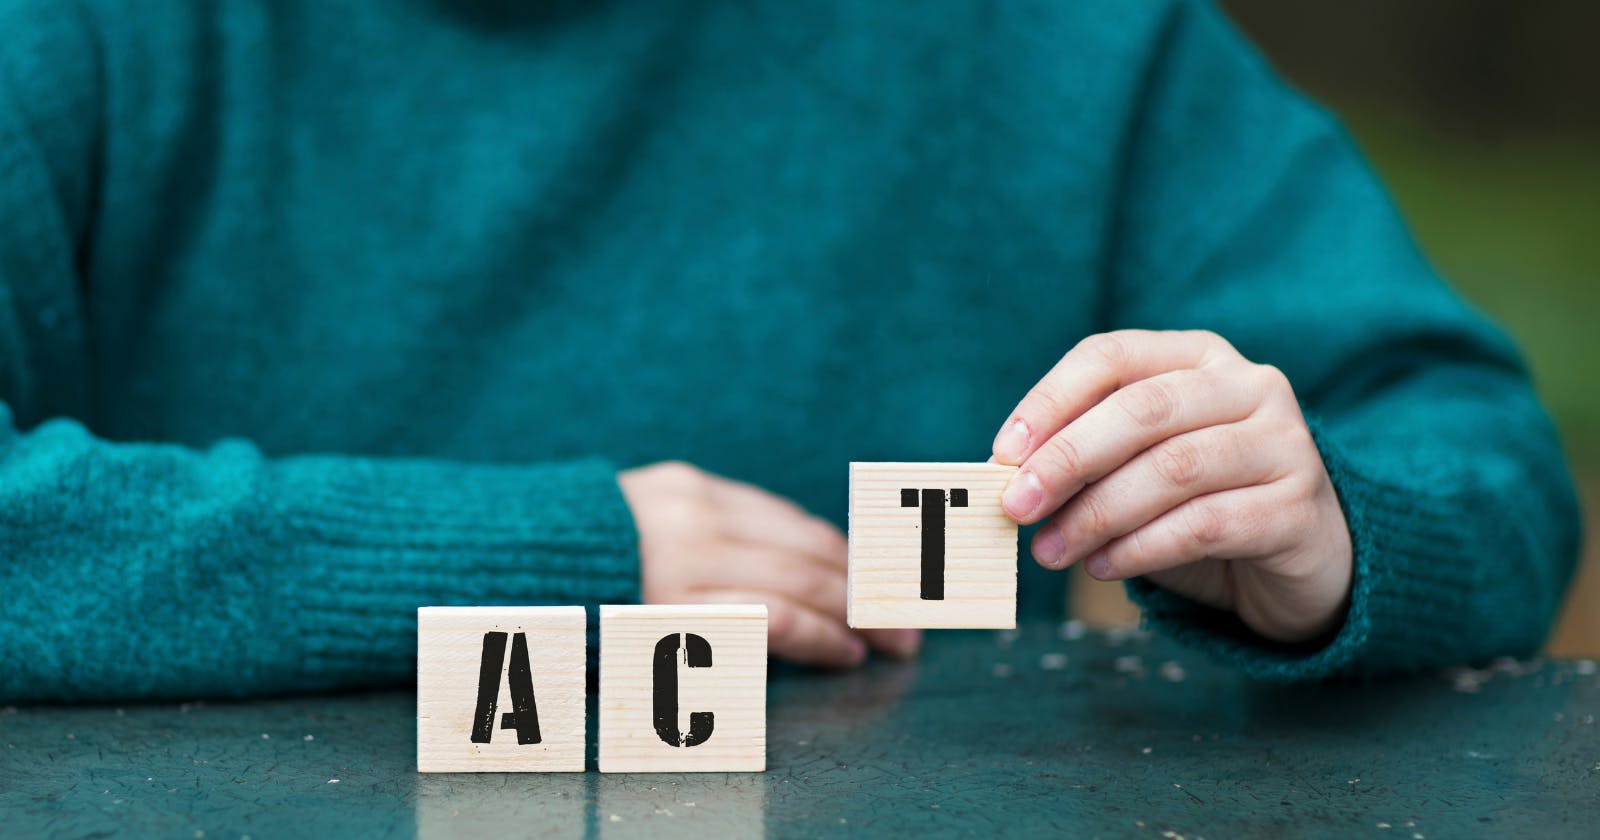 Keeping Tests Valuable: Avoid Problems In The Act Blocks